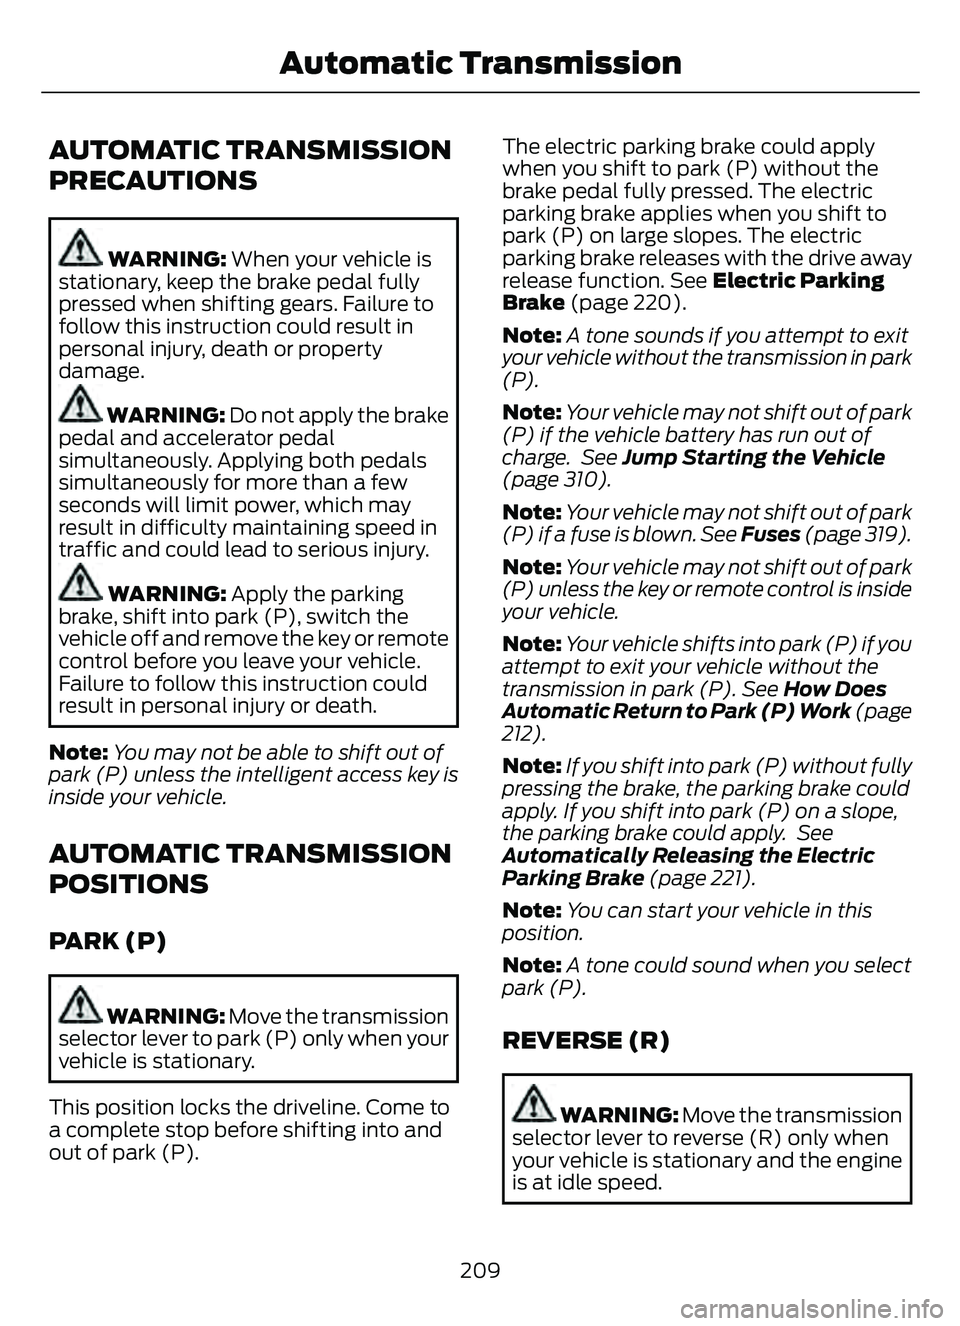 FORD ESCAPE 2022  Owners Manual AUTOMATIC TRANSMISSION
PRECAUTIONS
WARNING: When your vehicle is
stationary, keep the brake pedal fully
pressed when shifting gears. Failure to
follow this instruction could result in
personal injury,